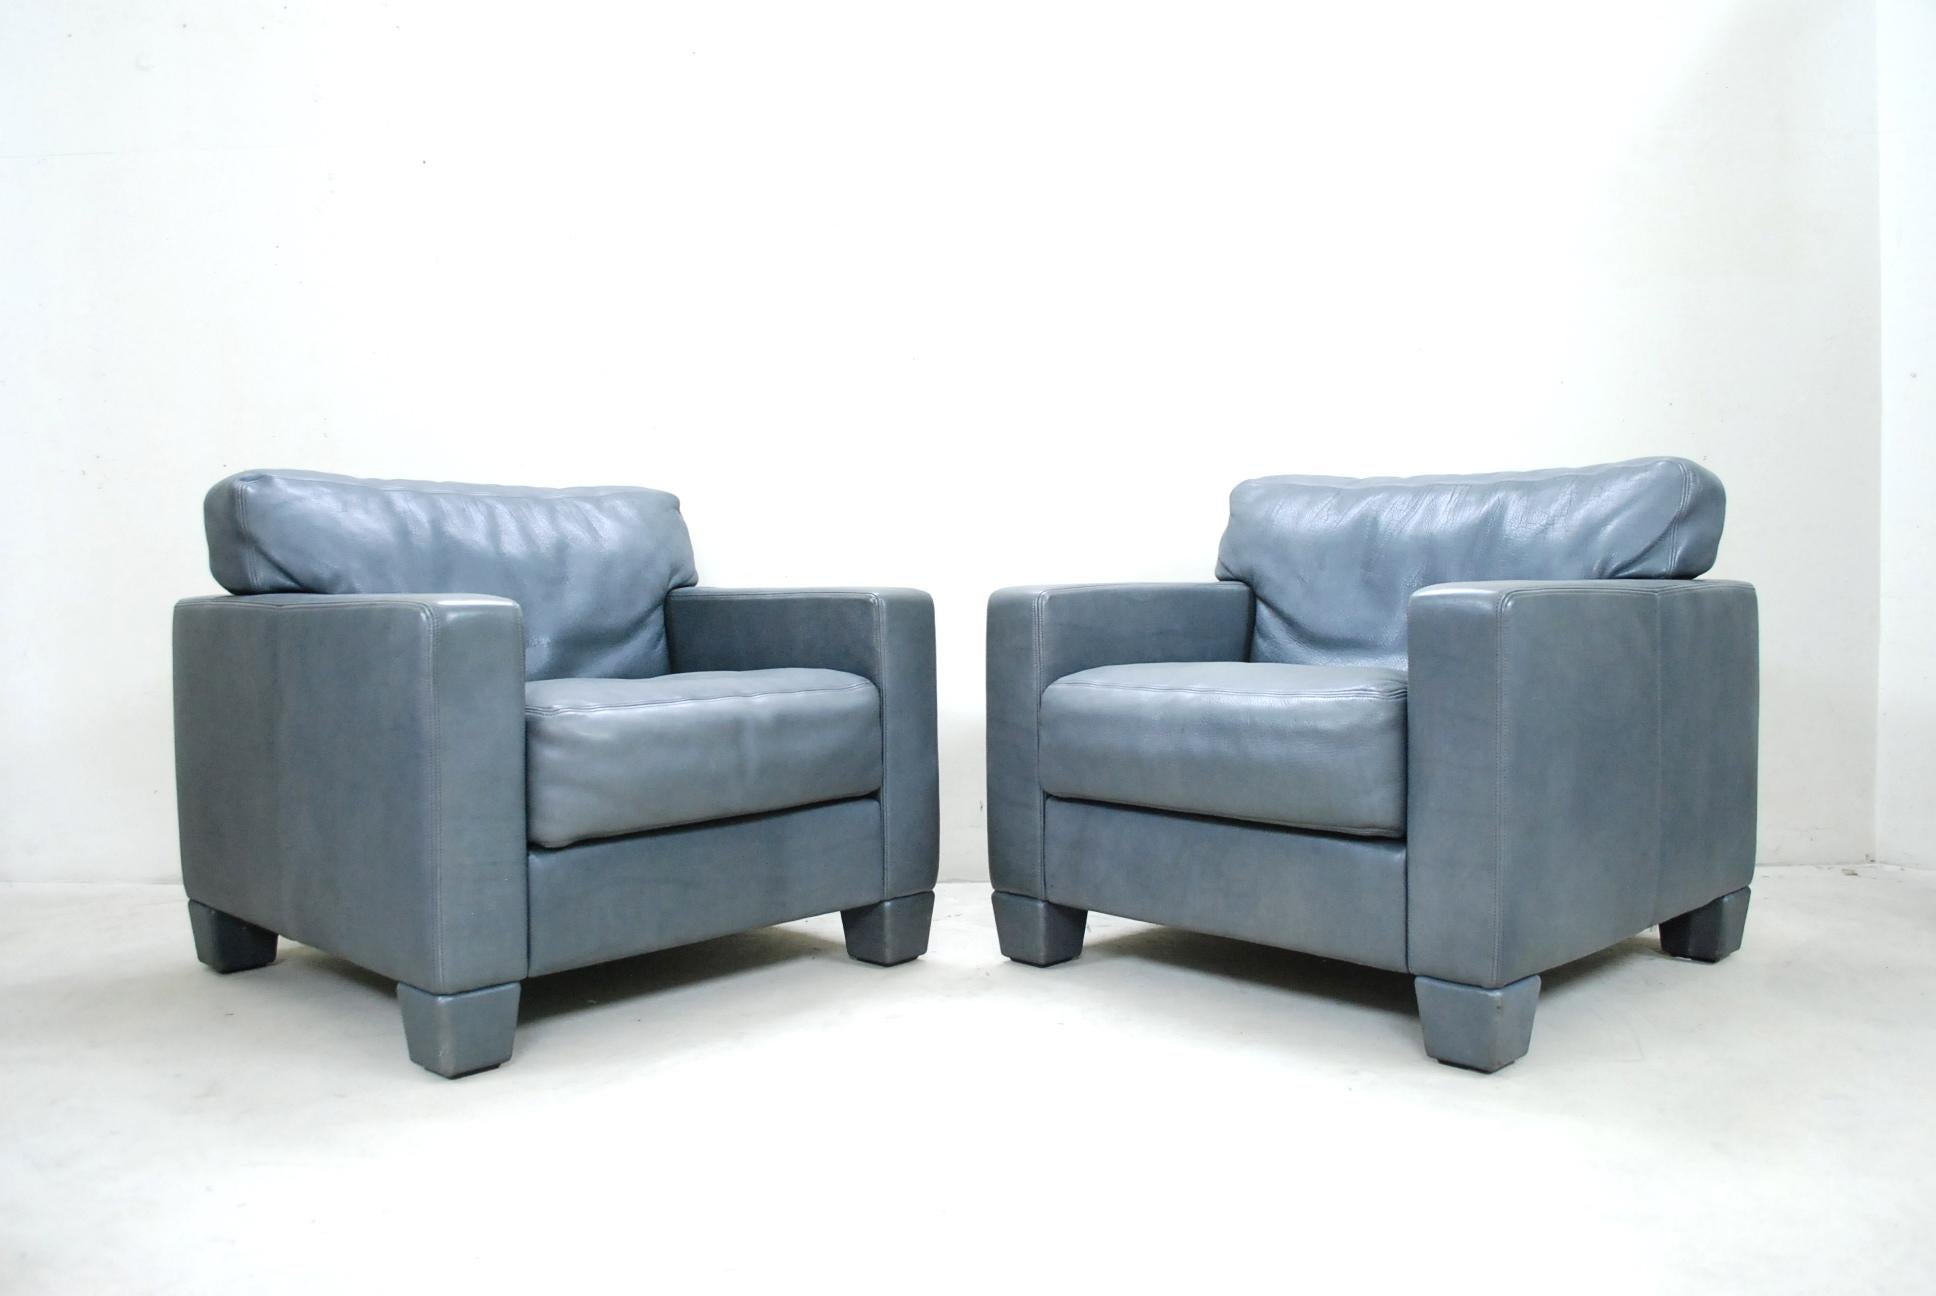 De Sede leather armchair DS 17.
The leather is the DS Club leather a thick grey aniline leather.
Great comfort and a classic timeless design by De Sede.
In a good condition.
Set of 2 

 